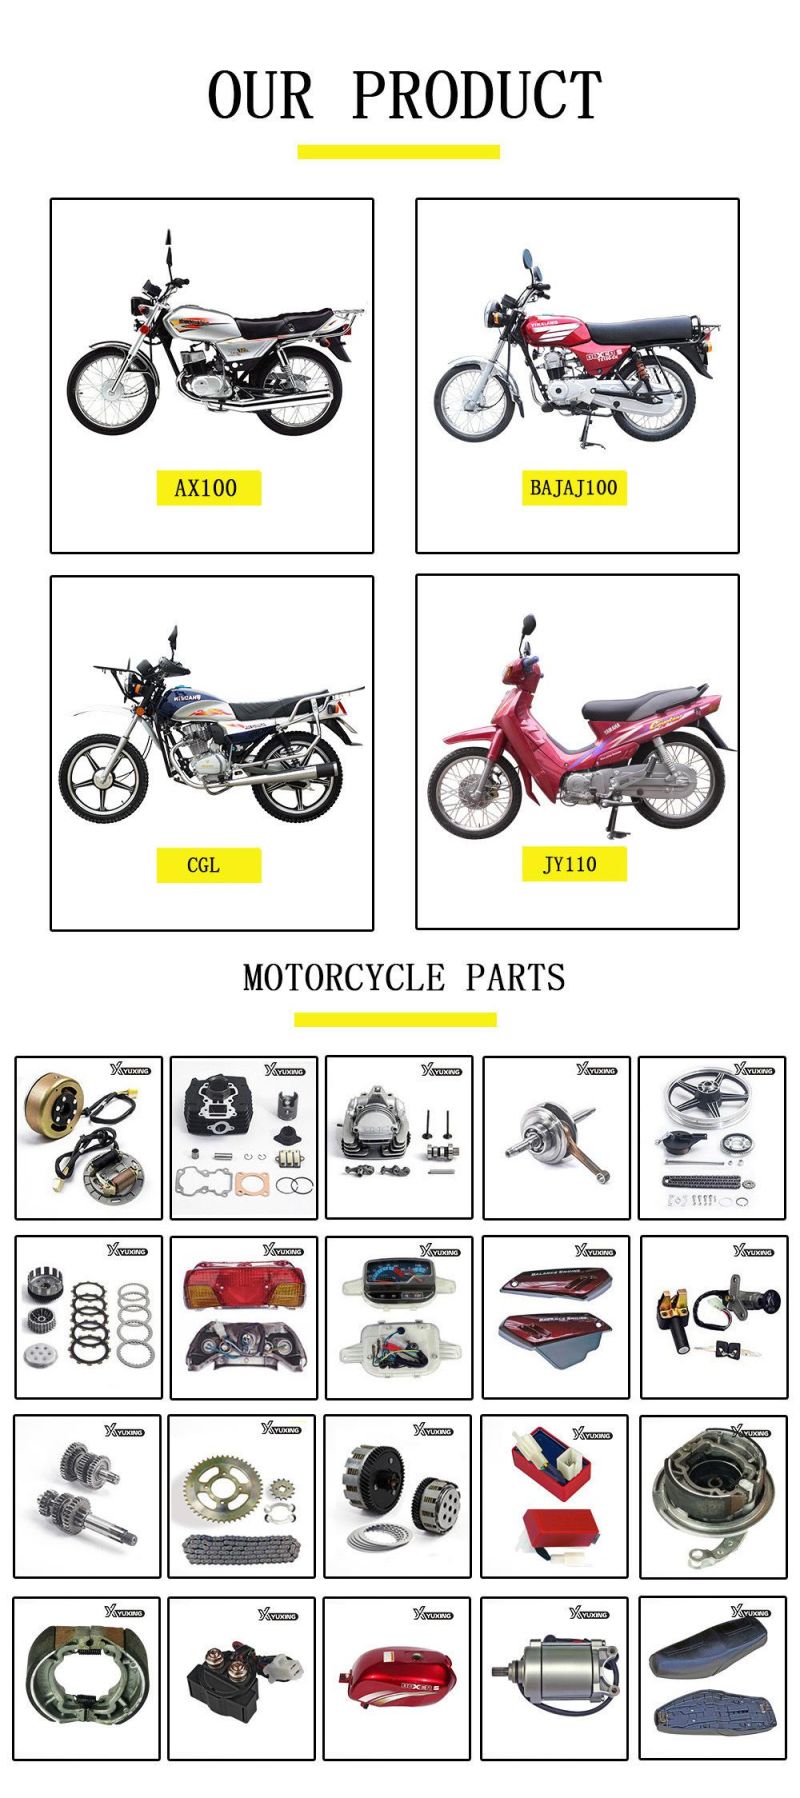 Factory Motorcycle Spare Parts Maintenance-Free Mf12V9-2A 12V9ah Motorcycle Battery for Motorbike